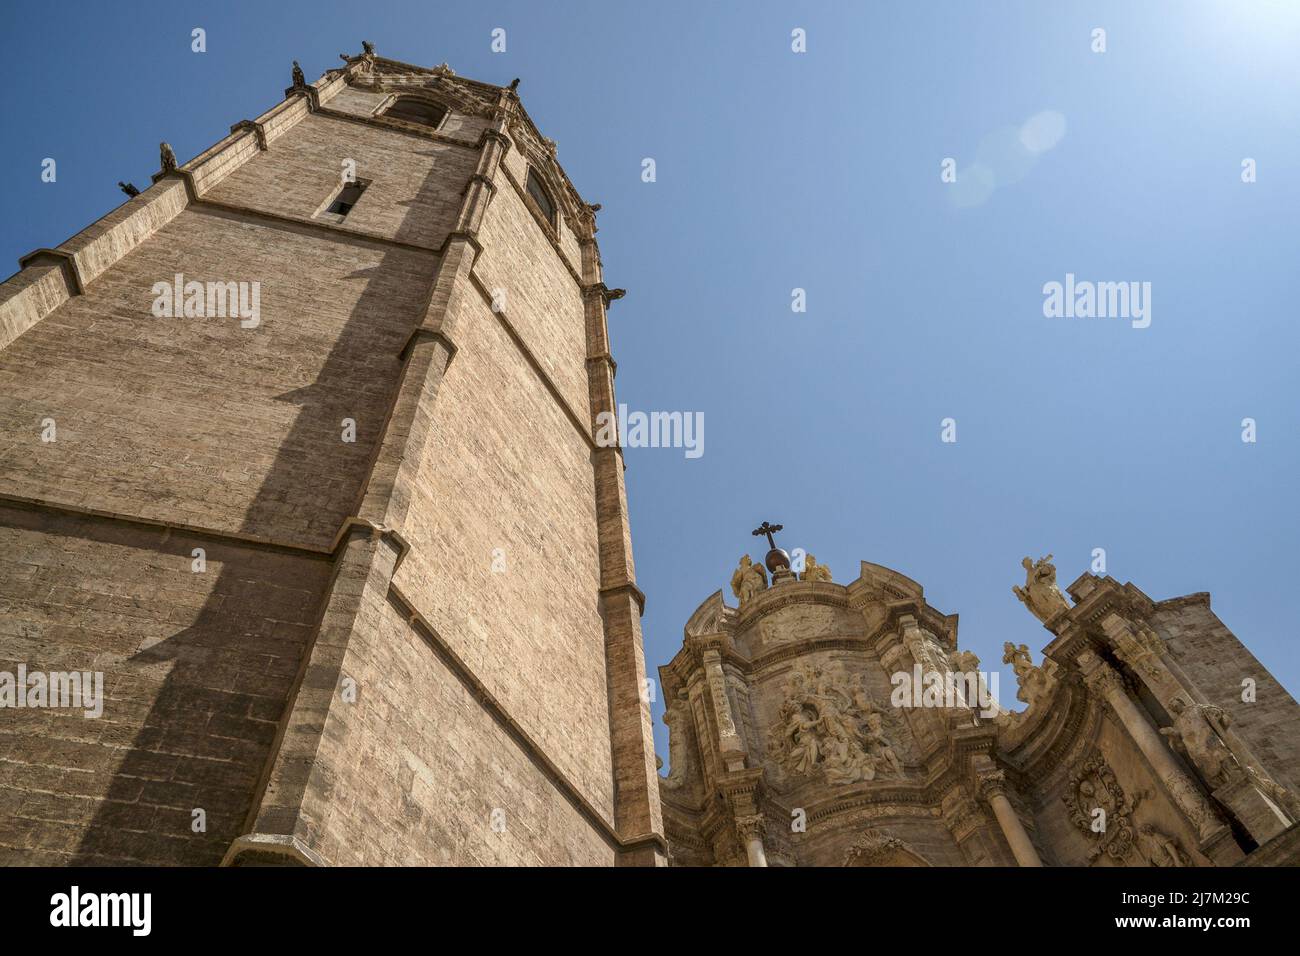 Valencia Spain historic gothic cathedral church Stock Photo